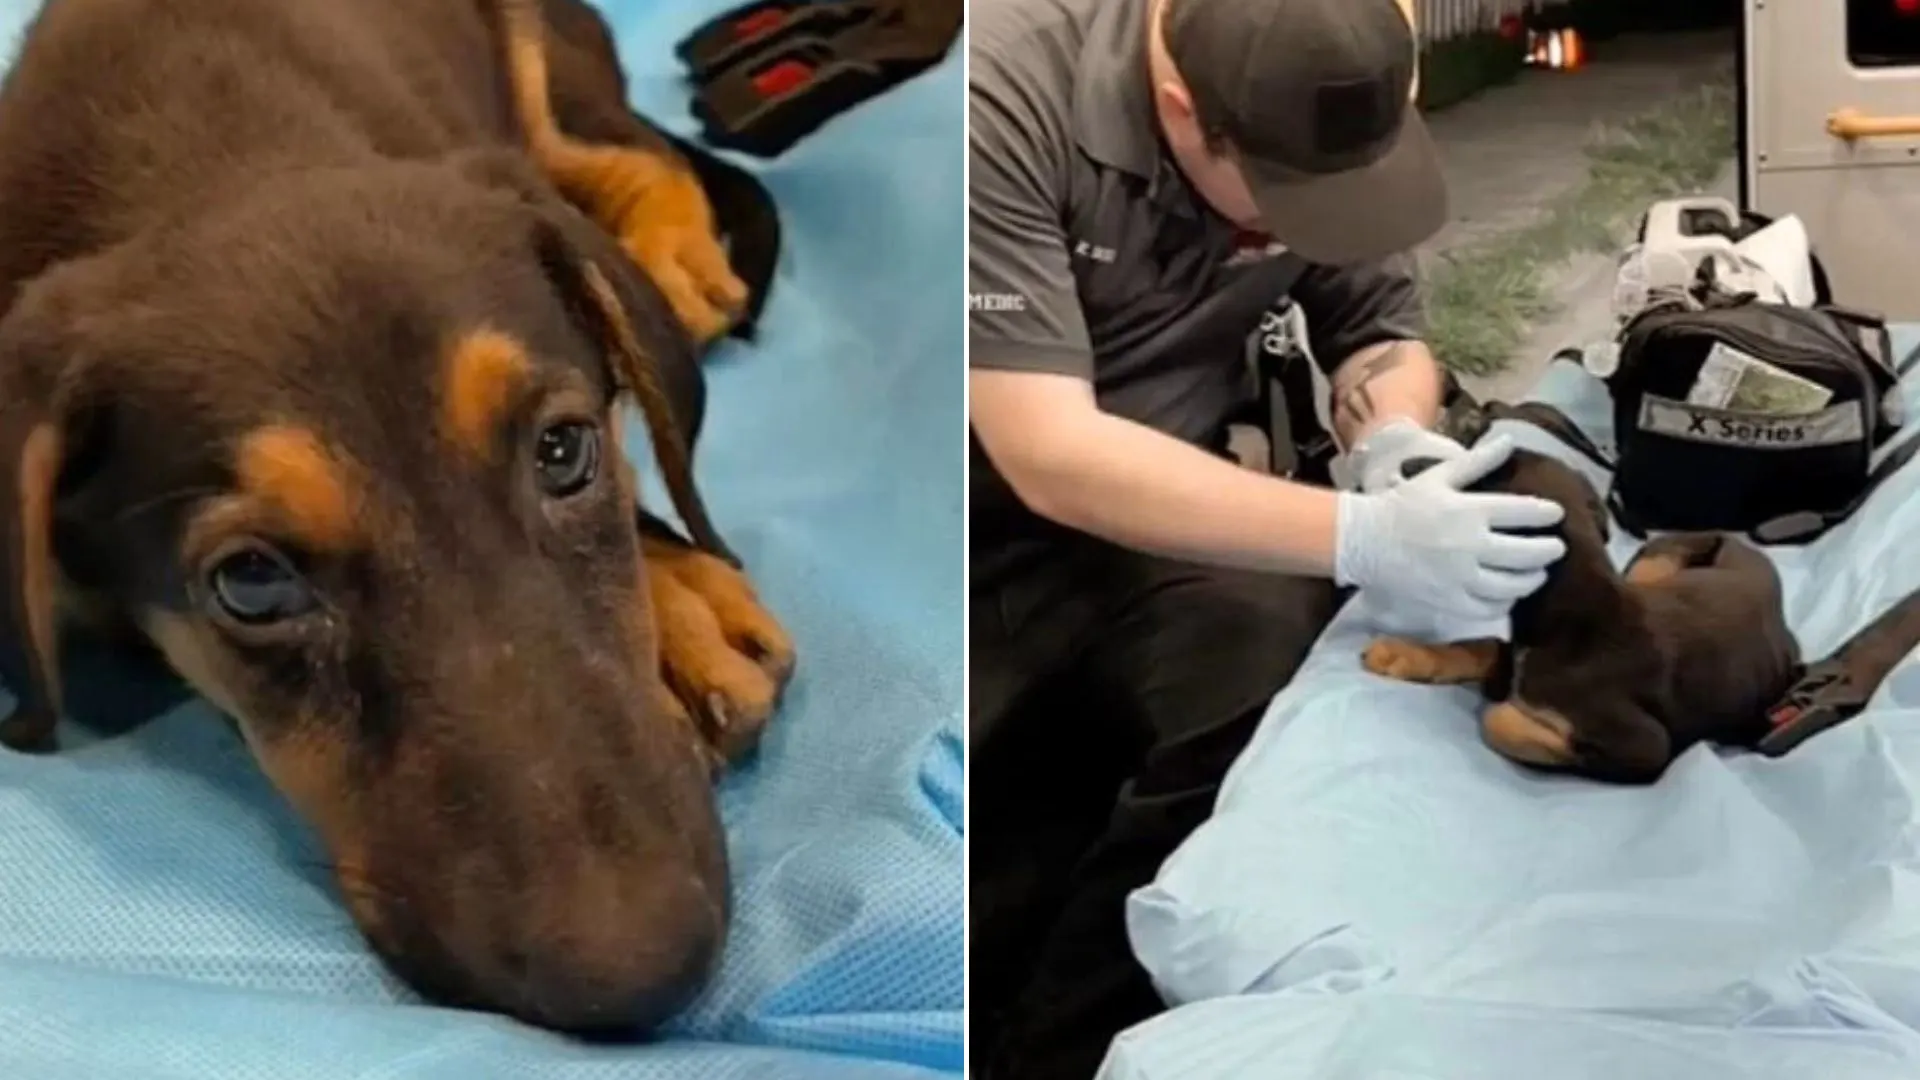 EMT Saves A Sweet Dog He Saw On His Way To The Hospital